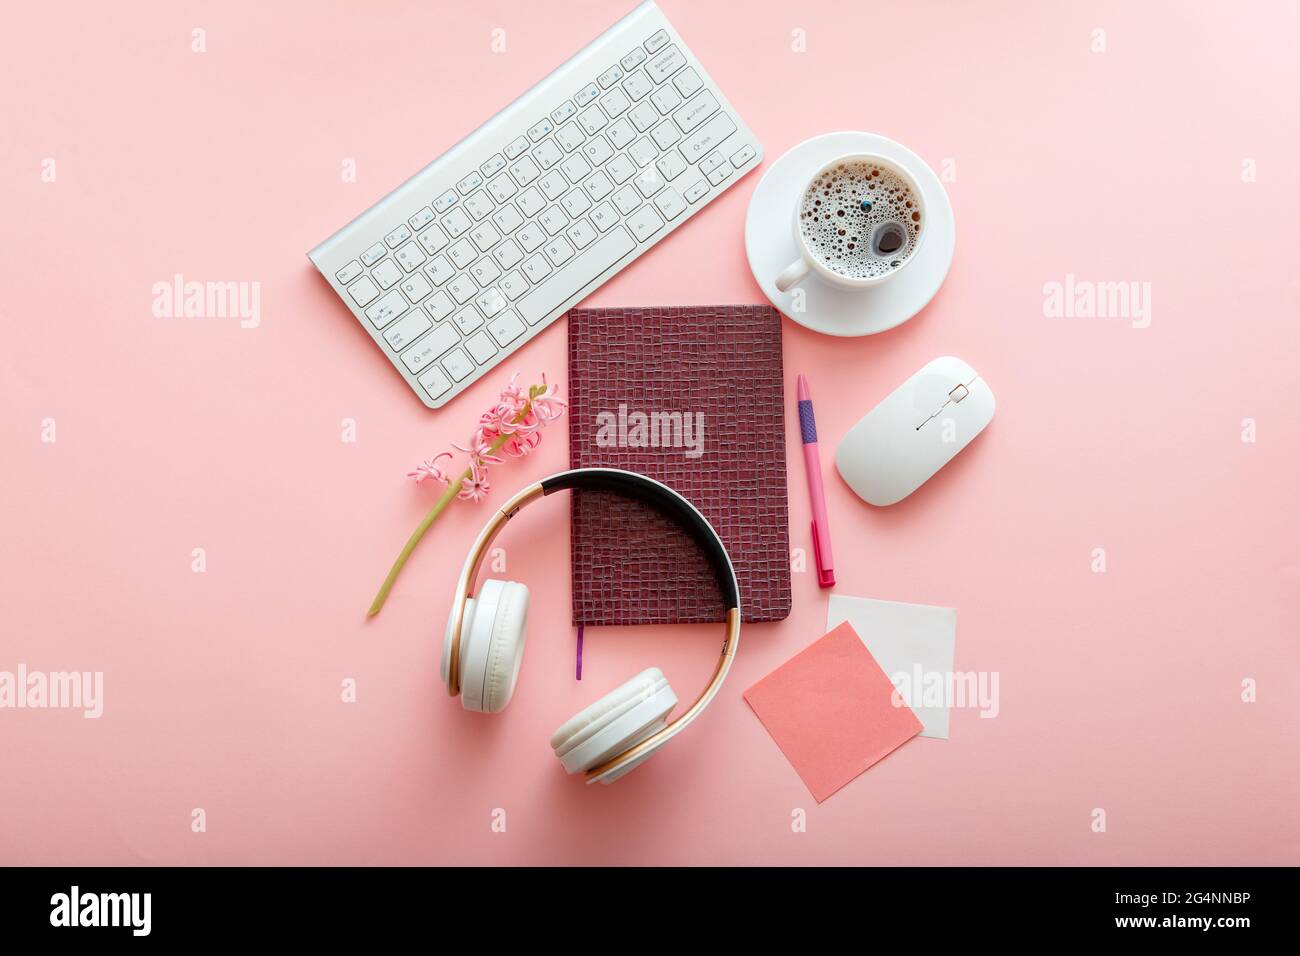 Office supplies on color pink table work desk. Girly workspace with keyboard mouse notepad headphones and coffee flower. School girl student workplace Stock Photo